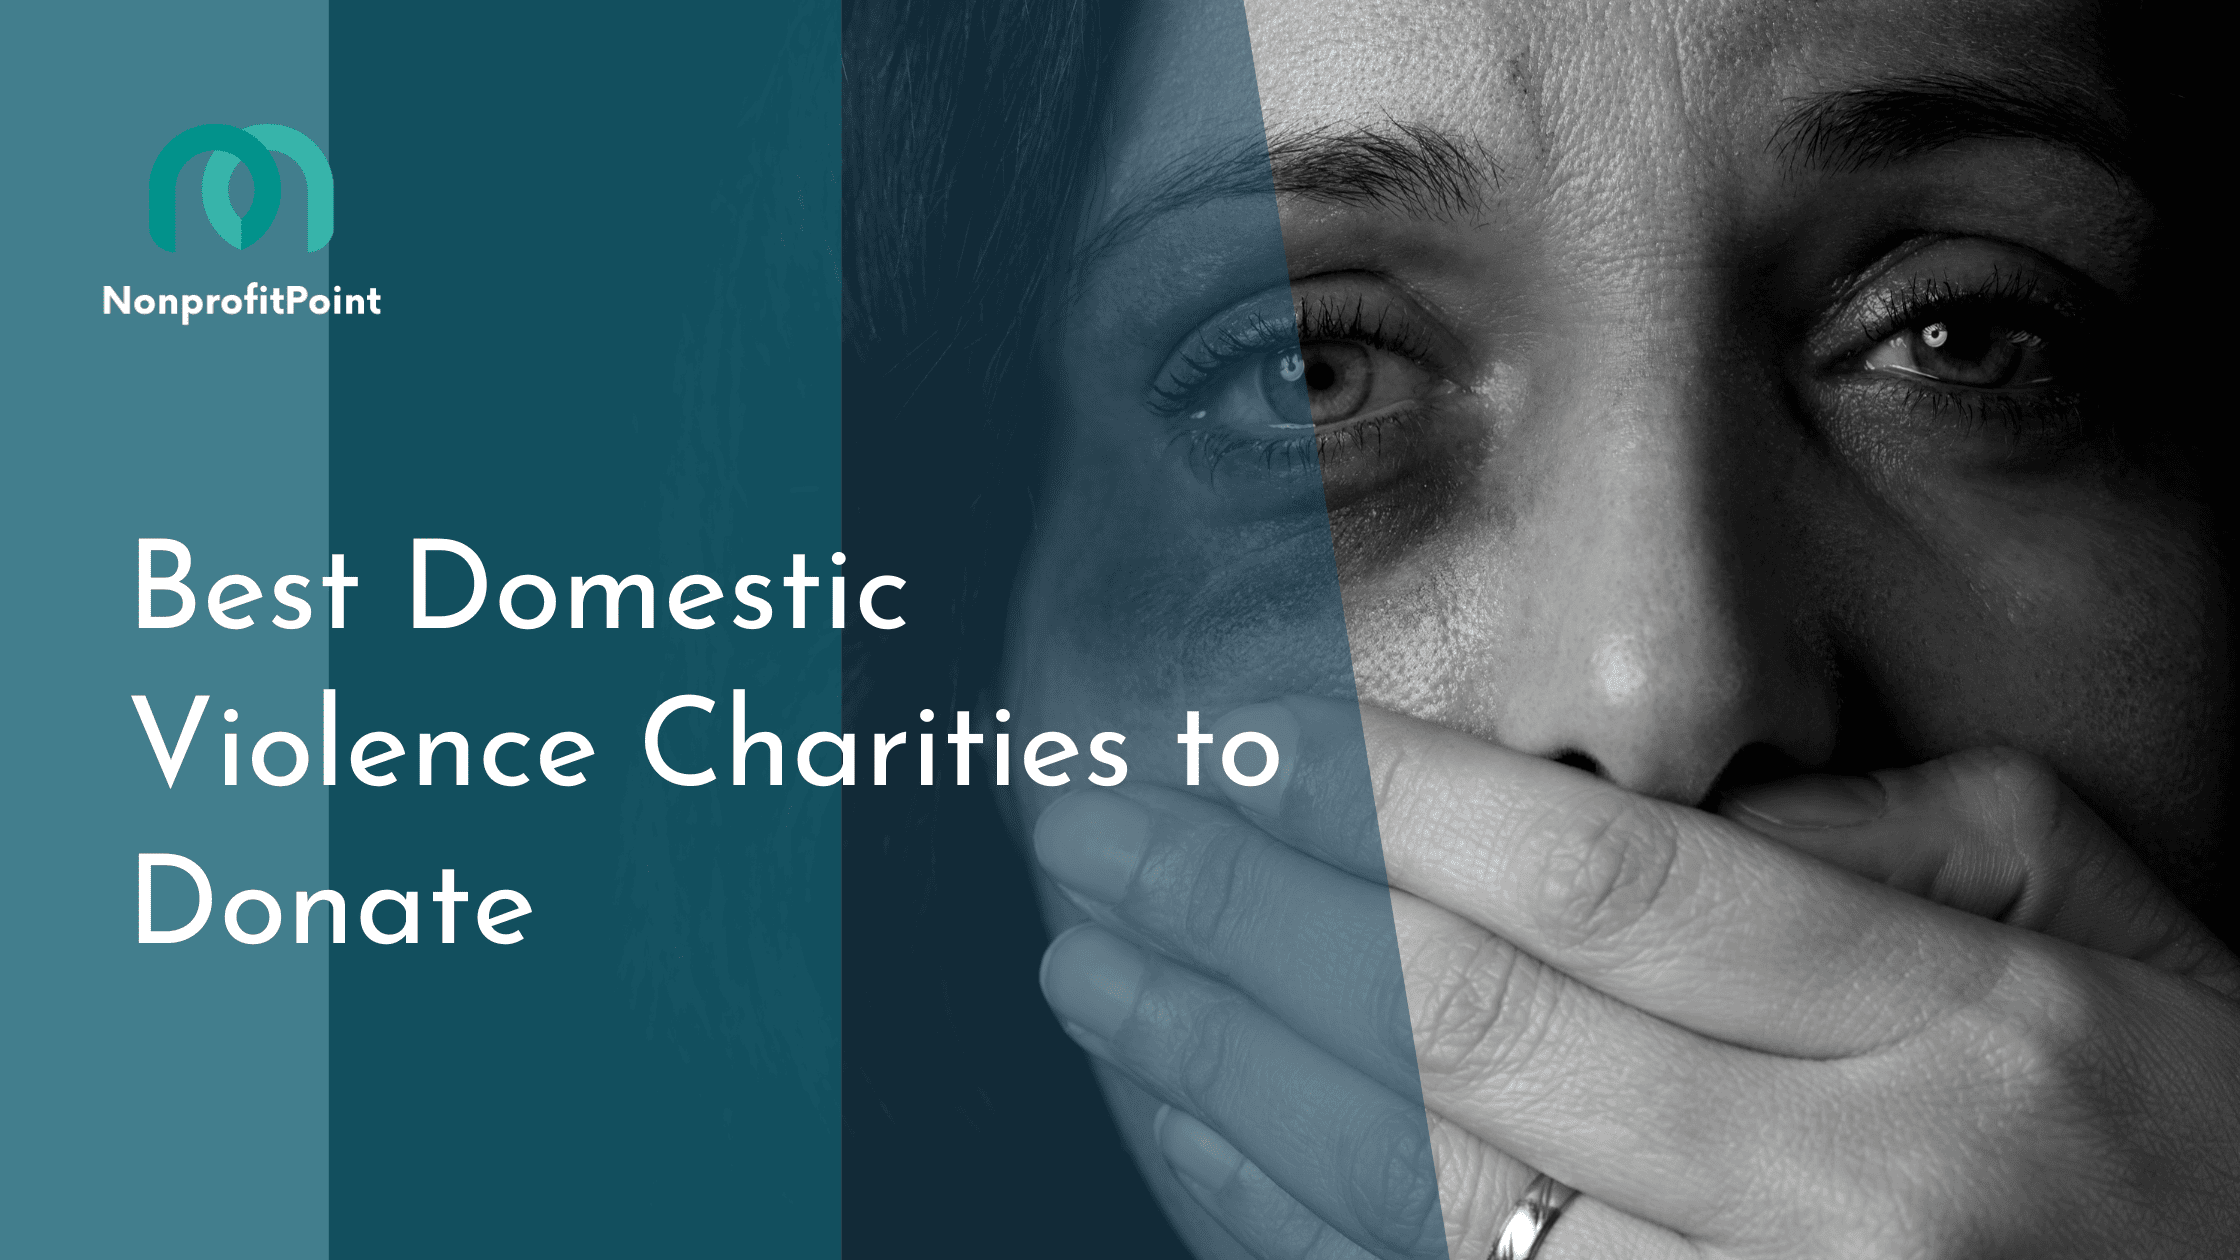 Best Domestic Violence Charities to Donate